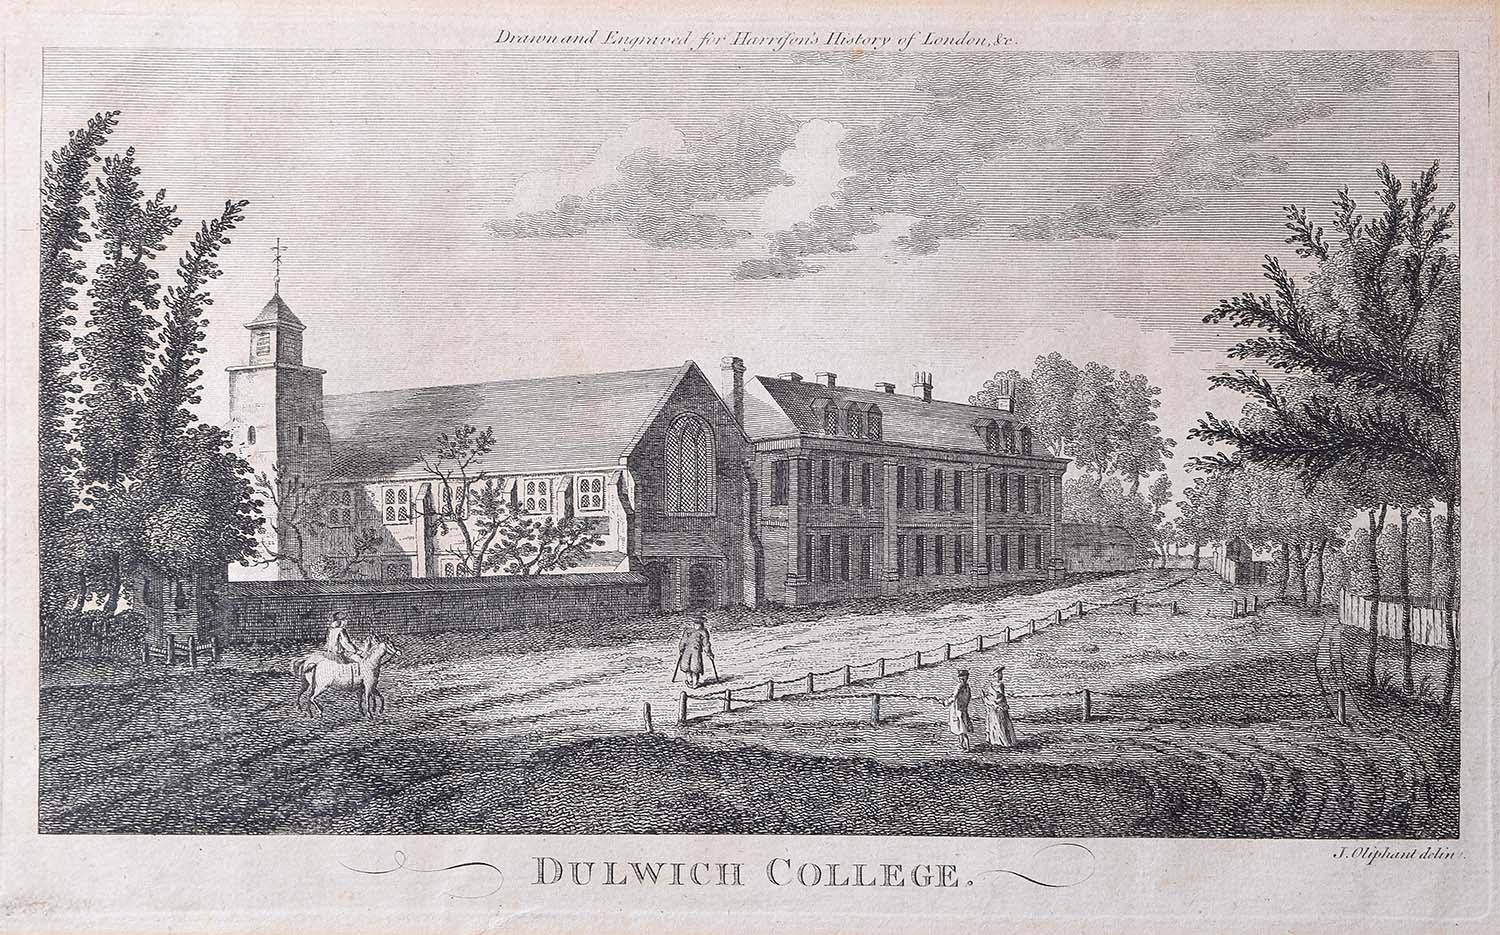 Dulwich College J Oliphant Engraving 1775 Harrison's History of London